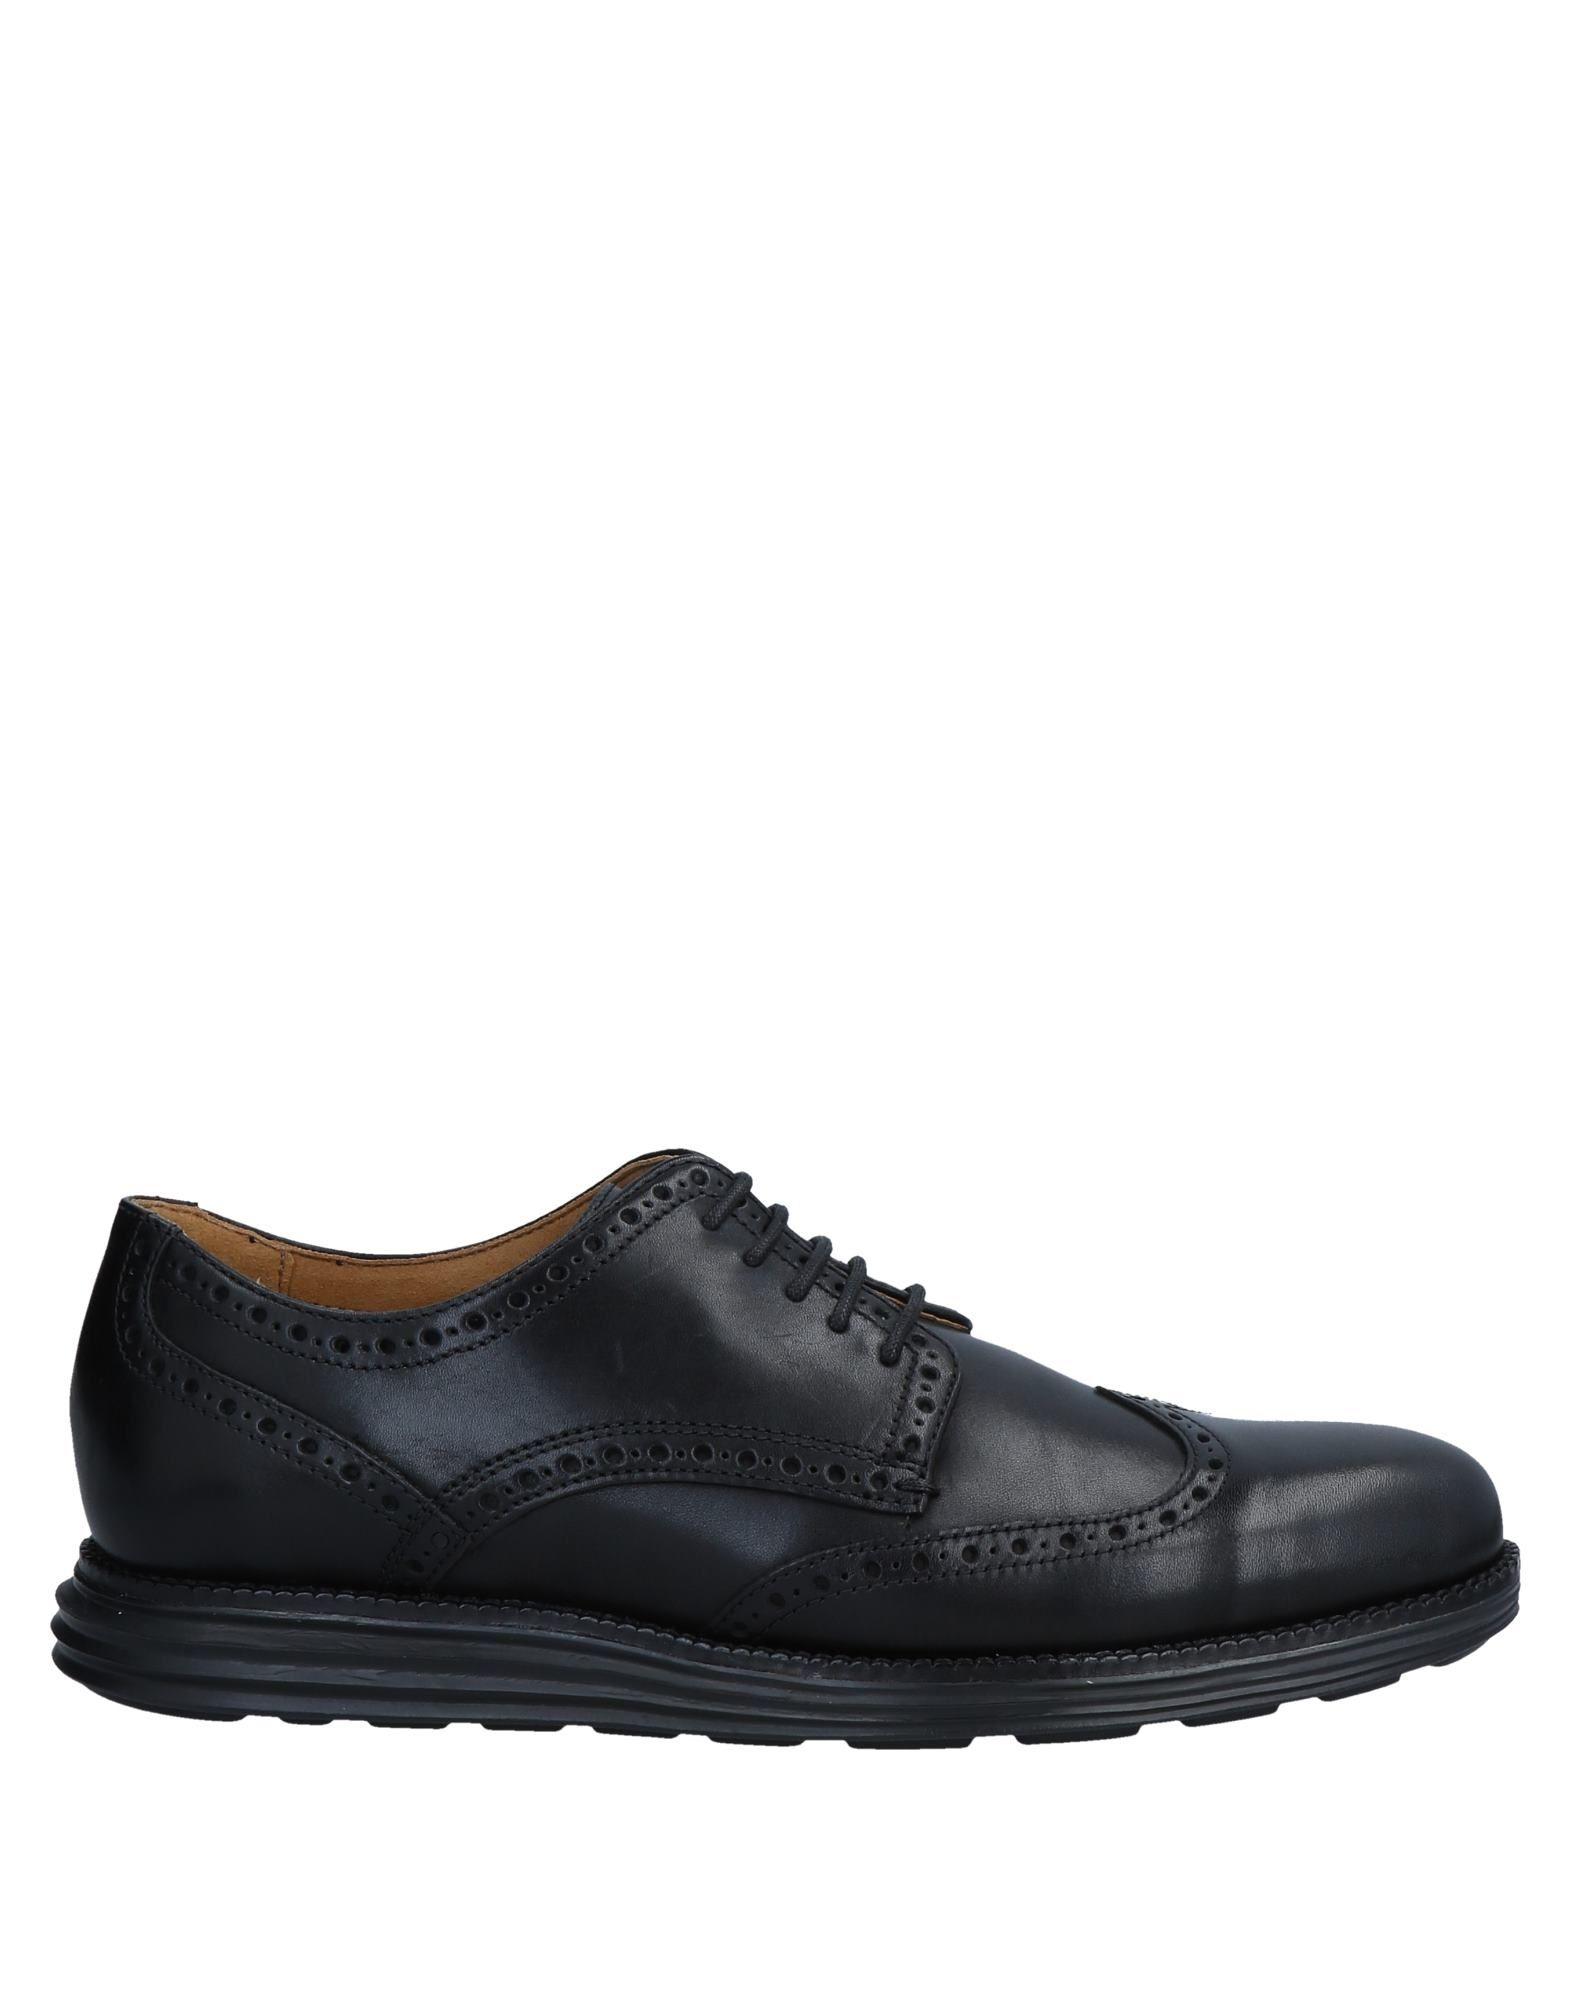 Cole Haan Leather Lace-up Shoe in Black for Men - Lyst